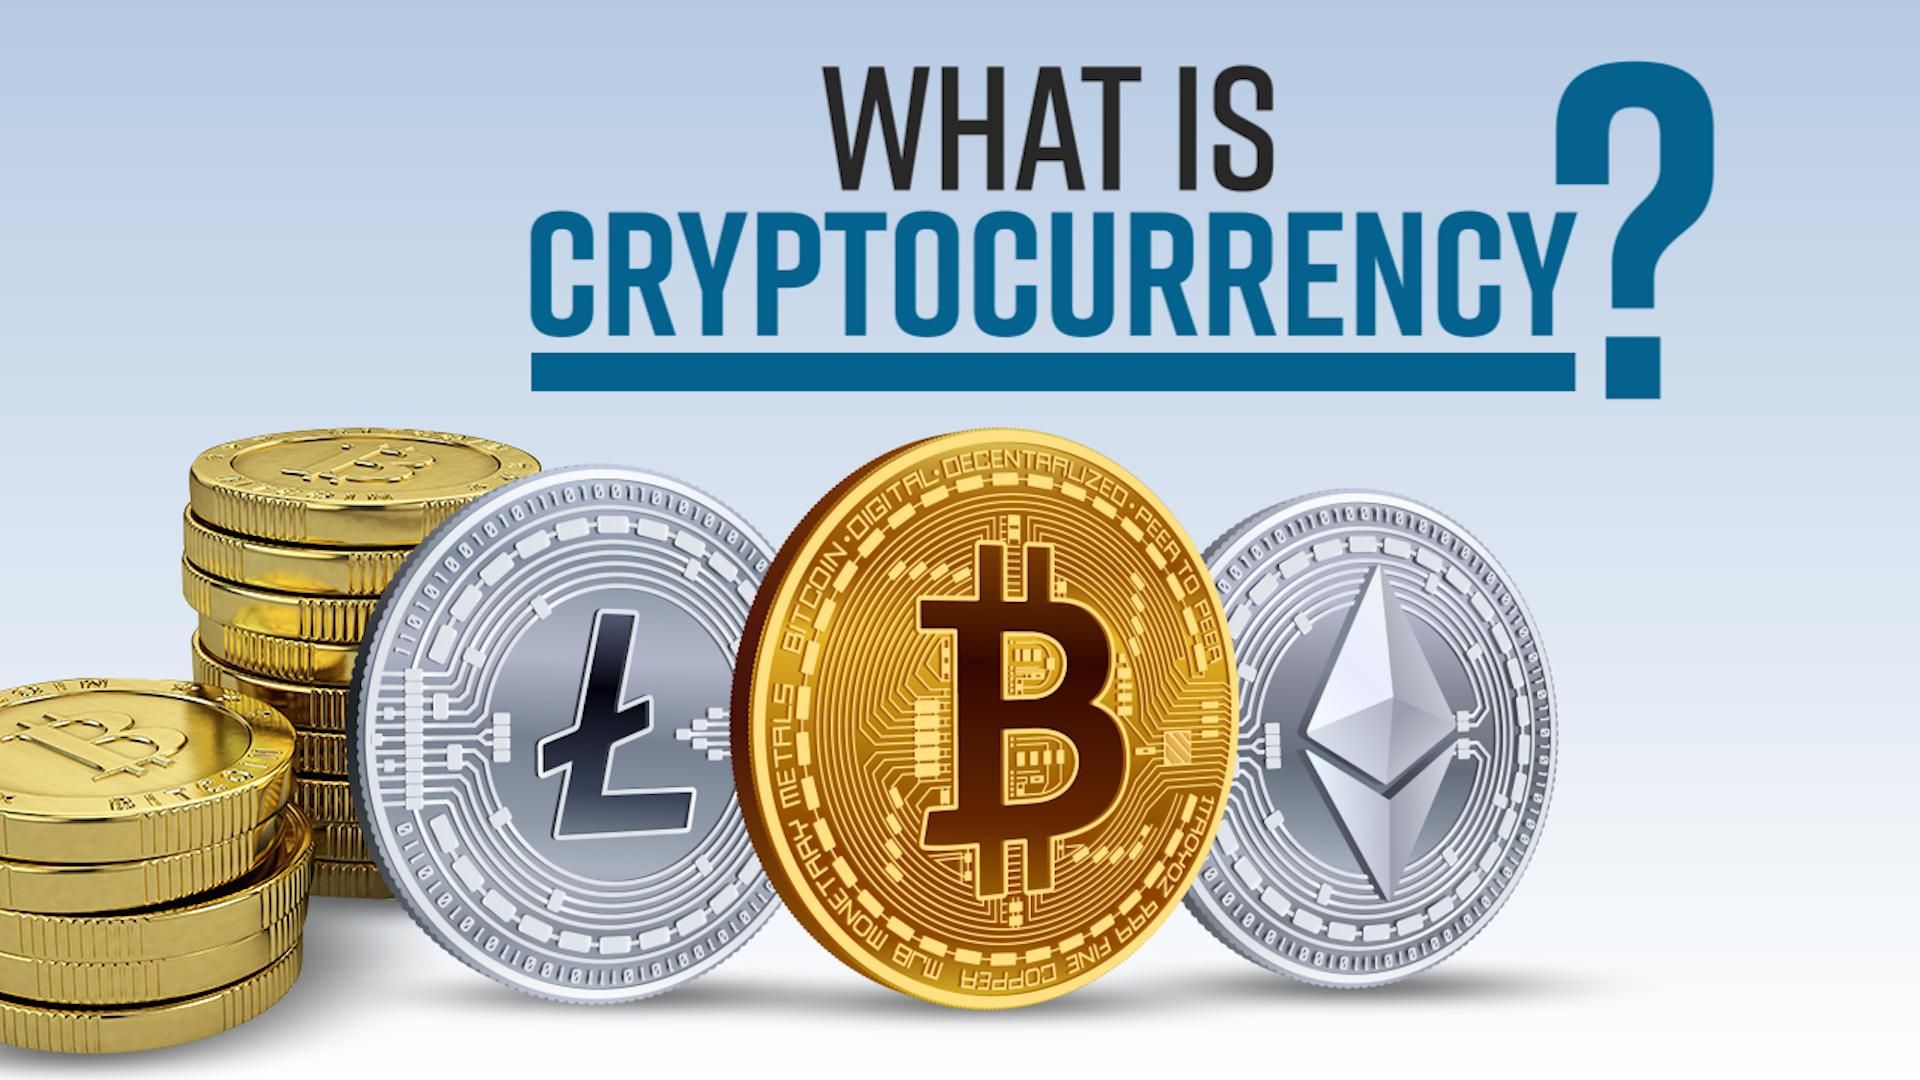 Cryptocurrency: What’s It All About?